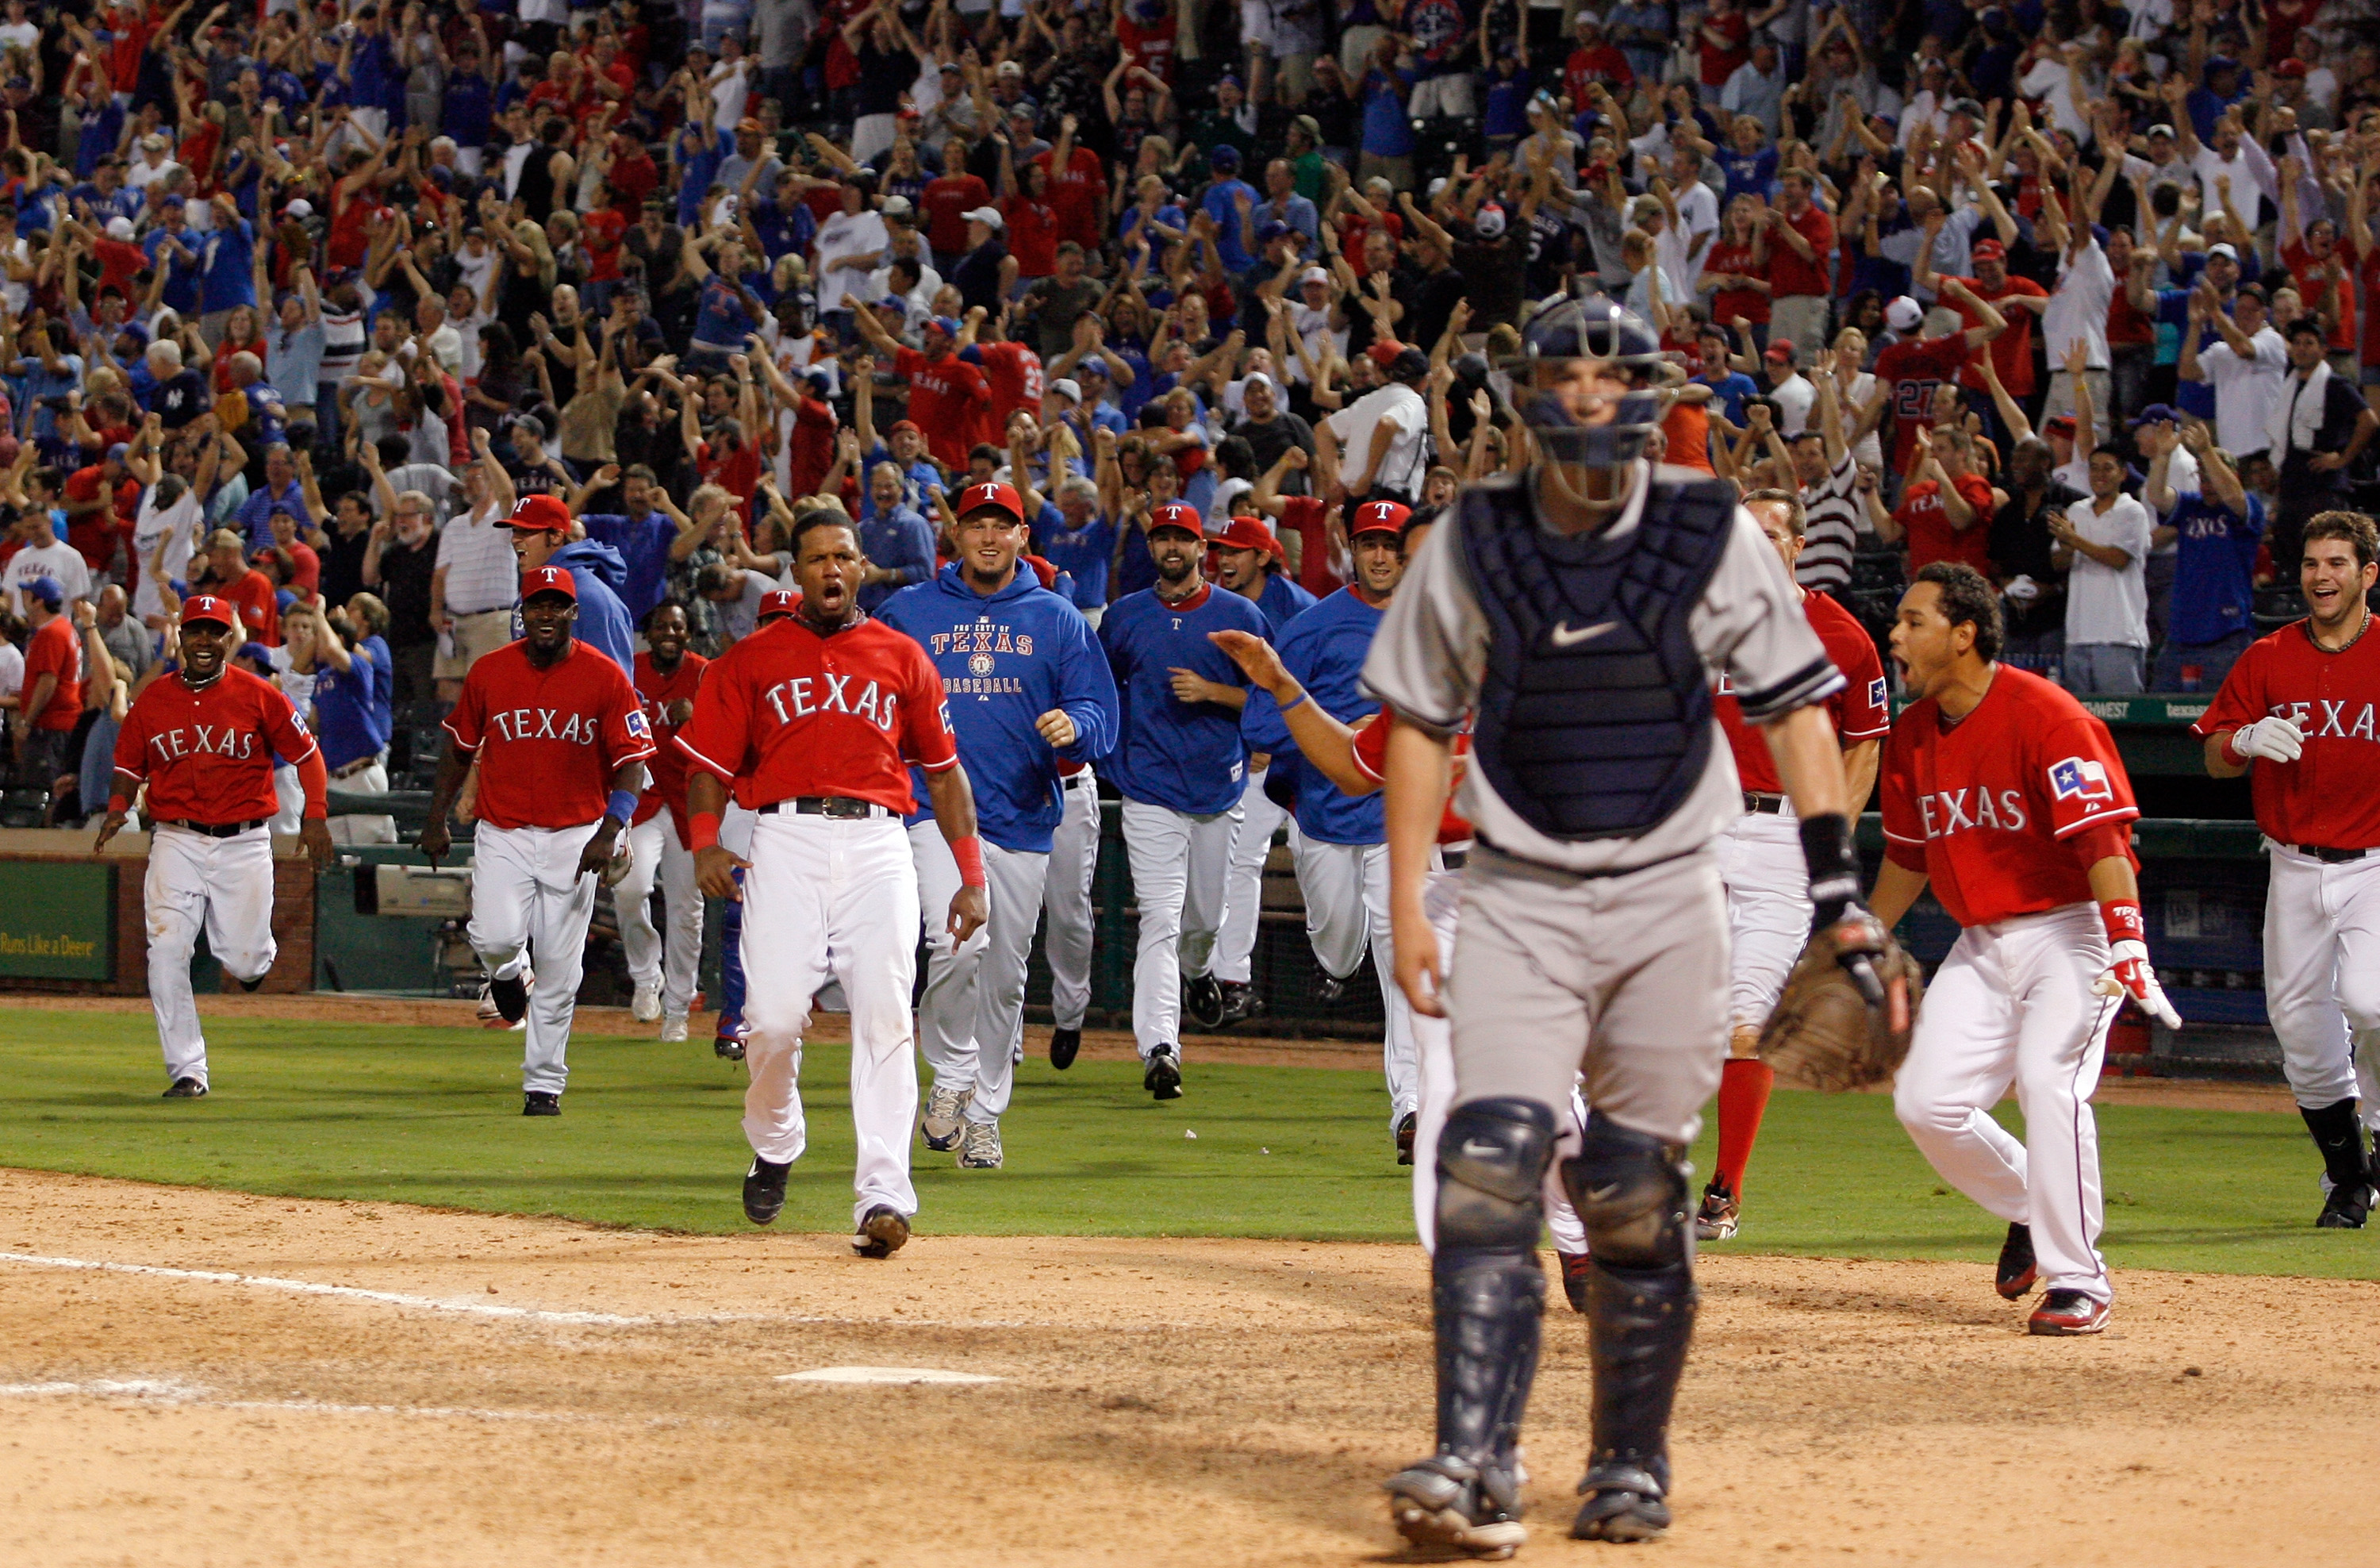 ARLINGTON, TX - SEPTEMBER 10:  The Texas Rangers celebrate at home plate after Nelson Cruz #17 hit the game-winning home run in the bottom of the 13th inning against the New York Yankees on September 10, 2010 at Rangers Ballpark in Arlington, Texas.  (Pho